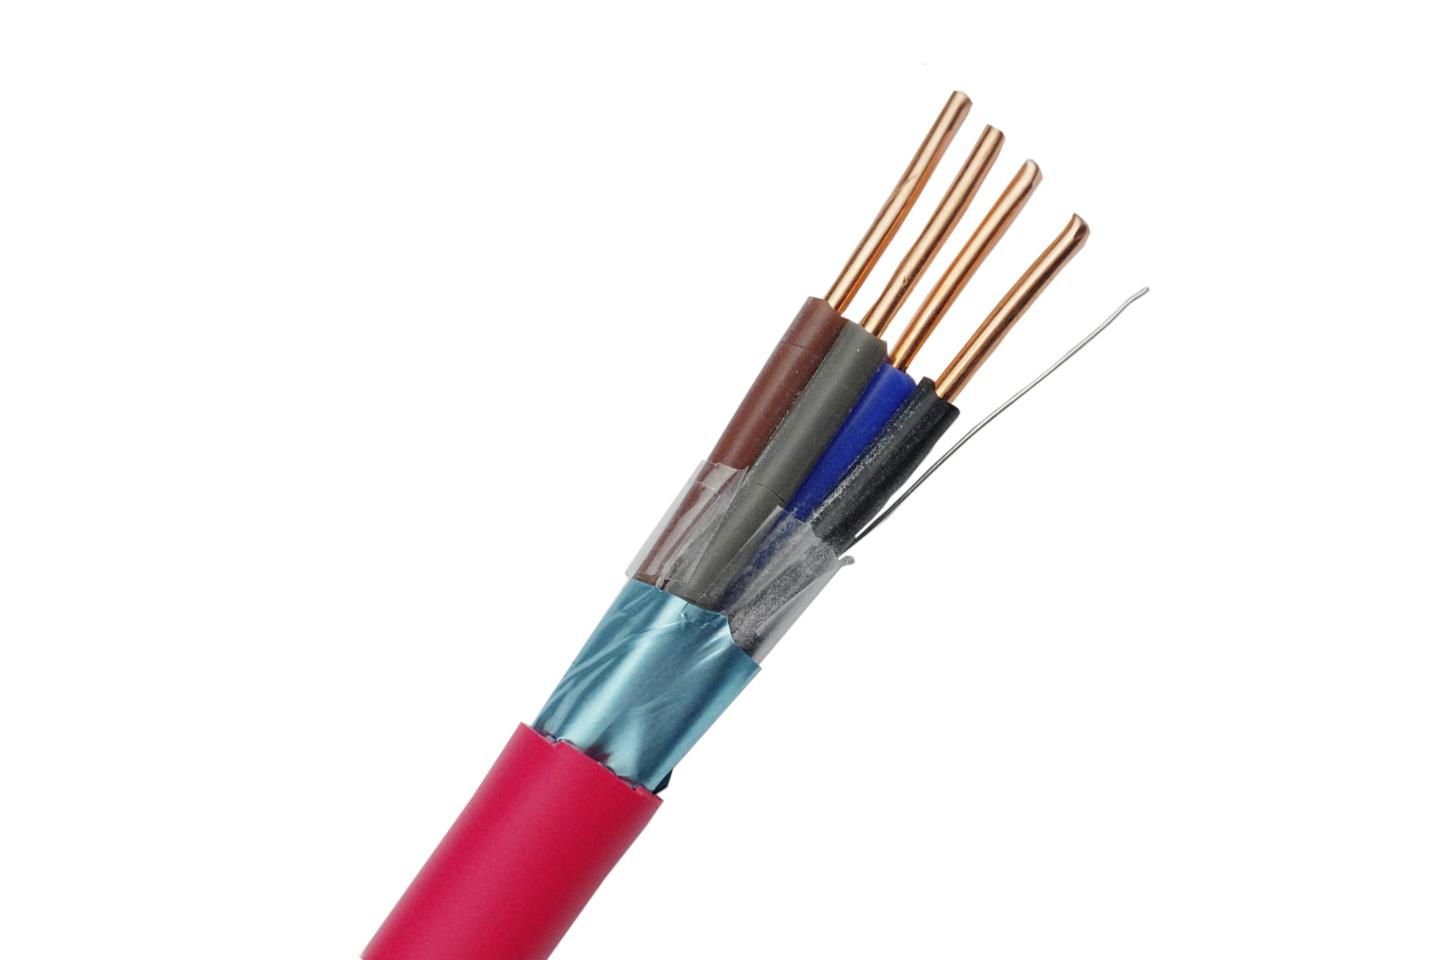 FRLS PVC Shielded Fire Resistant Cable for Security , Fire Proof Cable 1